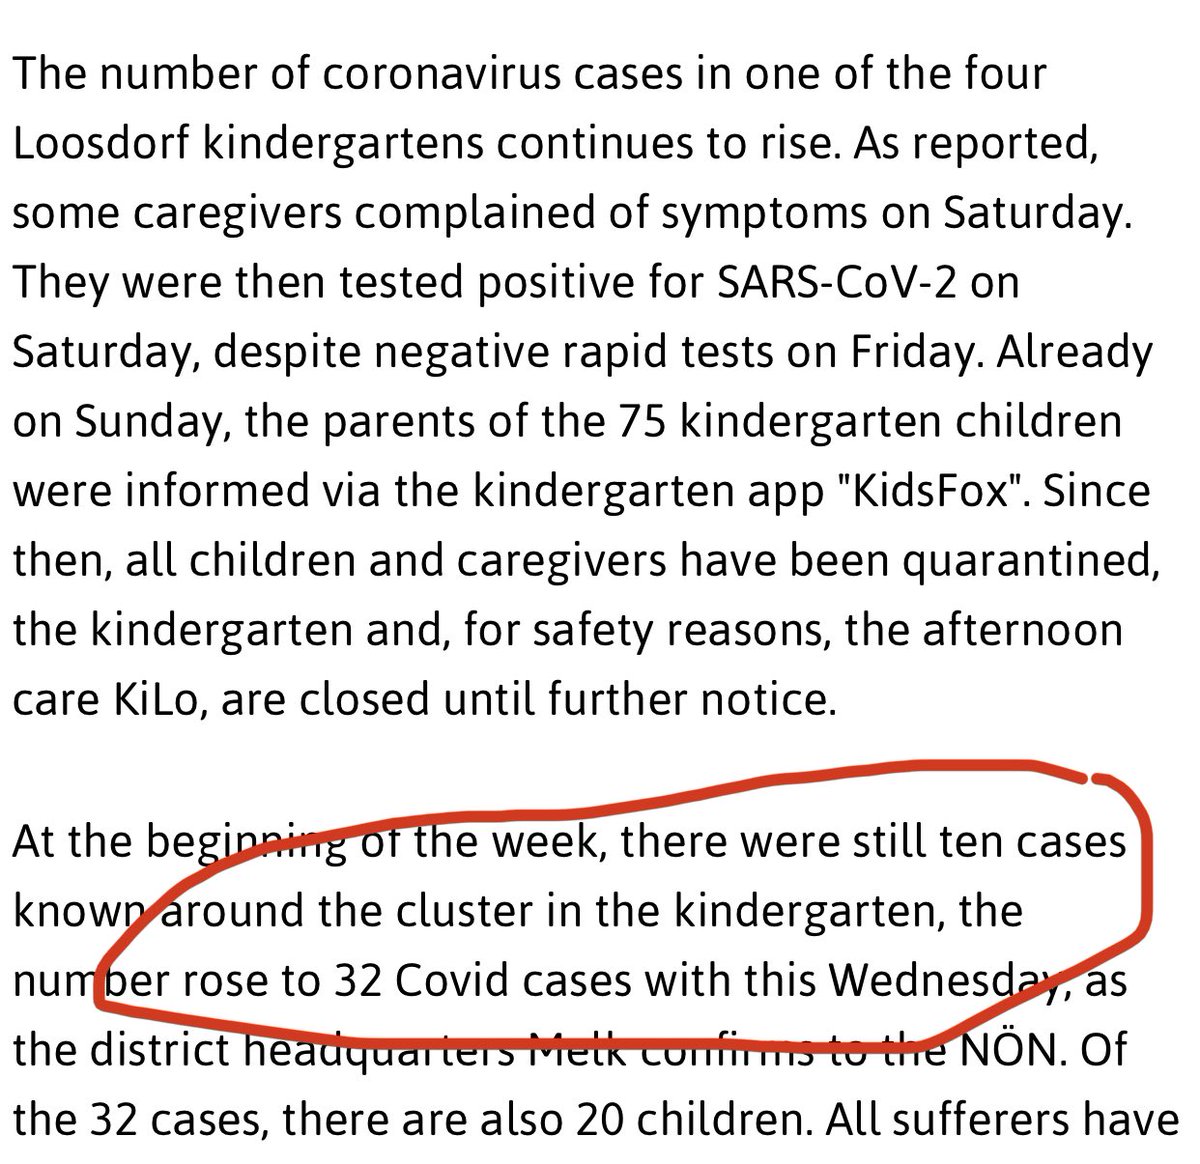 Sudden Kindergarten outbreak—a once small  #COVID19 outbreak in an Austrian kindergarten exploded from 10 cases Monday to suddenly *32 cases* by Wed—20 cases in kids, 12 adults & caregivers.(Article in German—translation below). HT  @hiems_mollis.  https://noen.at/melk/coronavirus-kindergarten-cluster-bereits-32-faelle-in-loosdorf-loosdorf-redaktionsfeed-coronavirus-kindergarten-redaktion-249646674